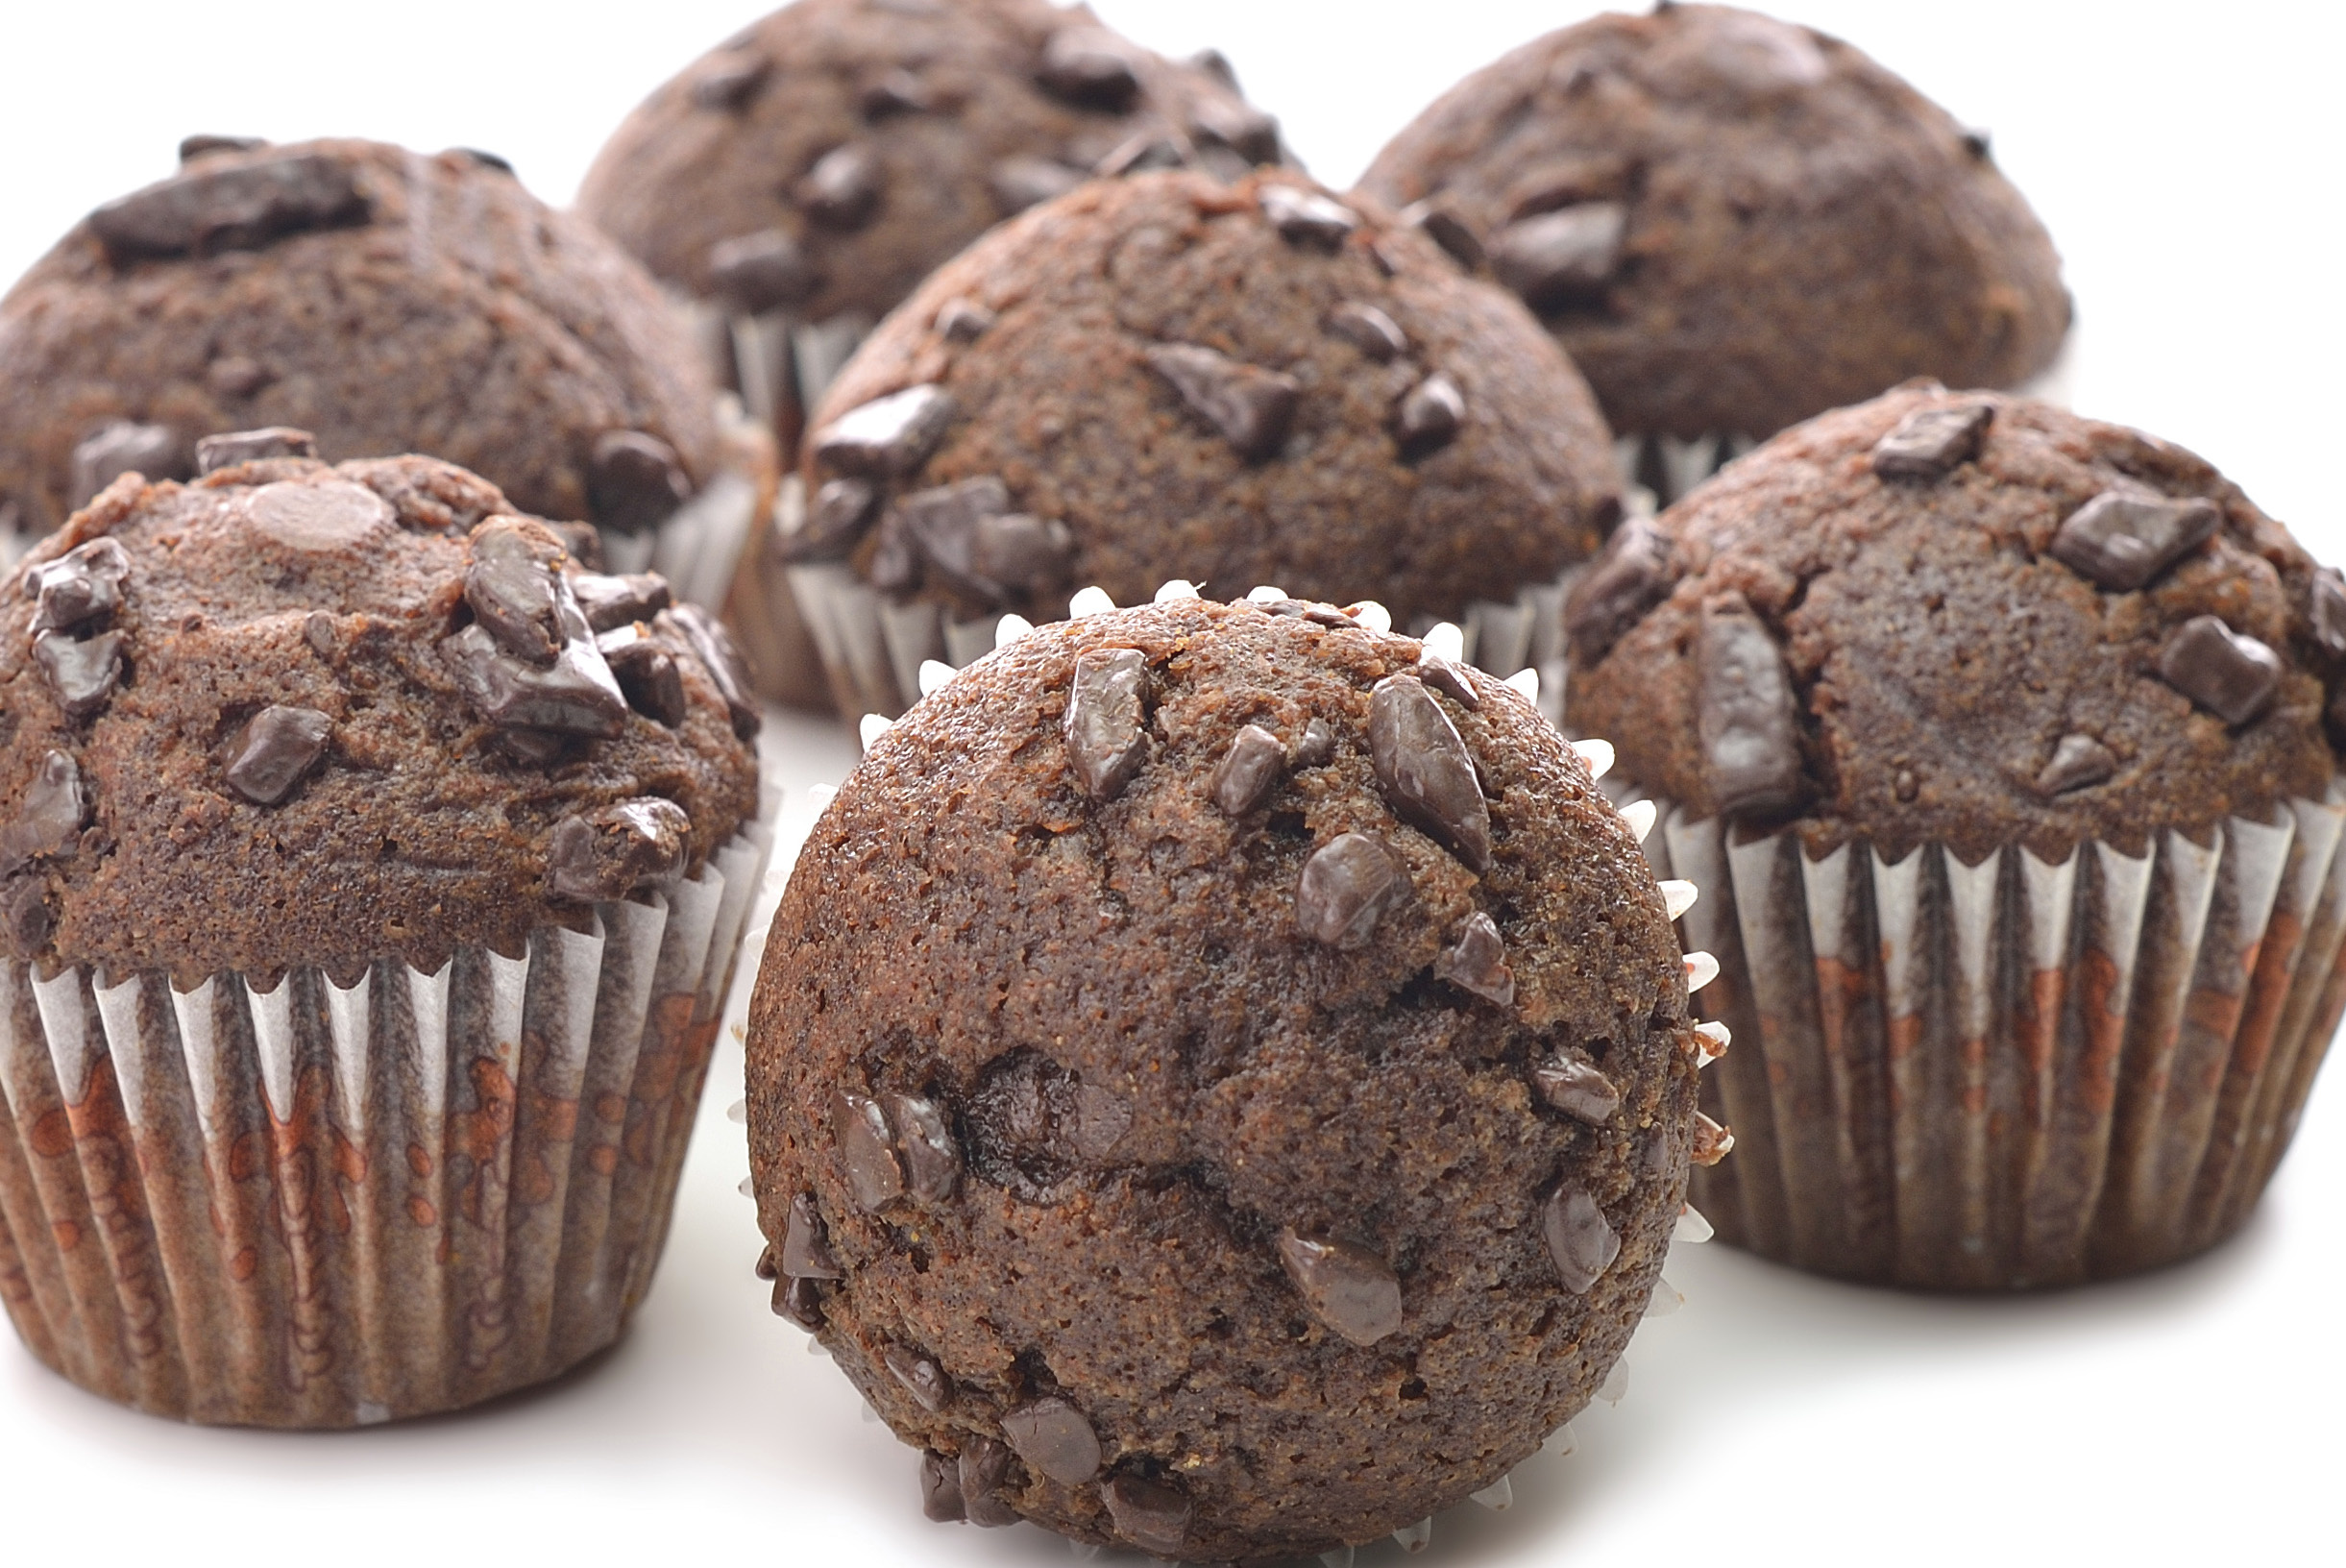 Muffin: Made with various types of flour, Finger food, Recipe. 2450x1640 HD Wallpaper.